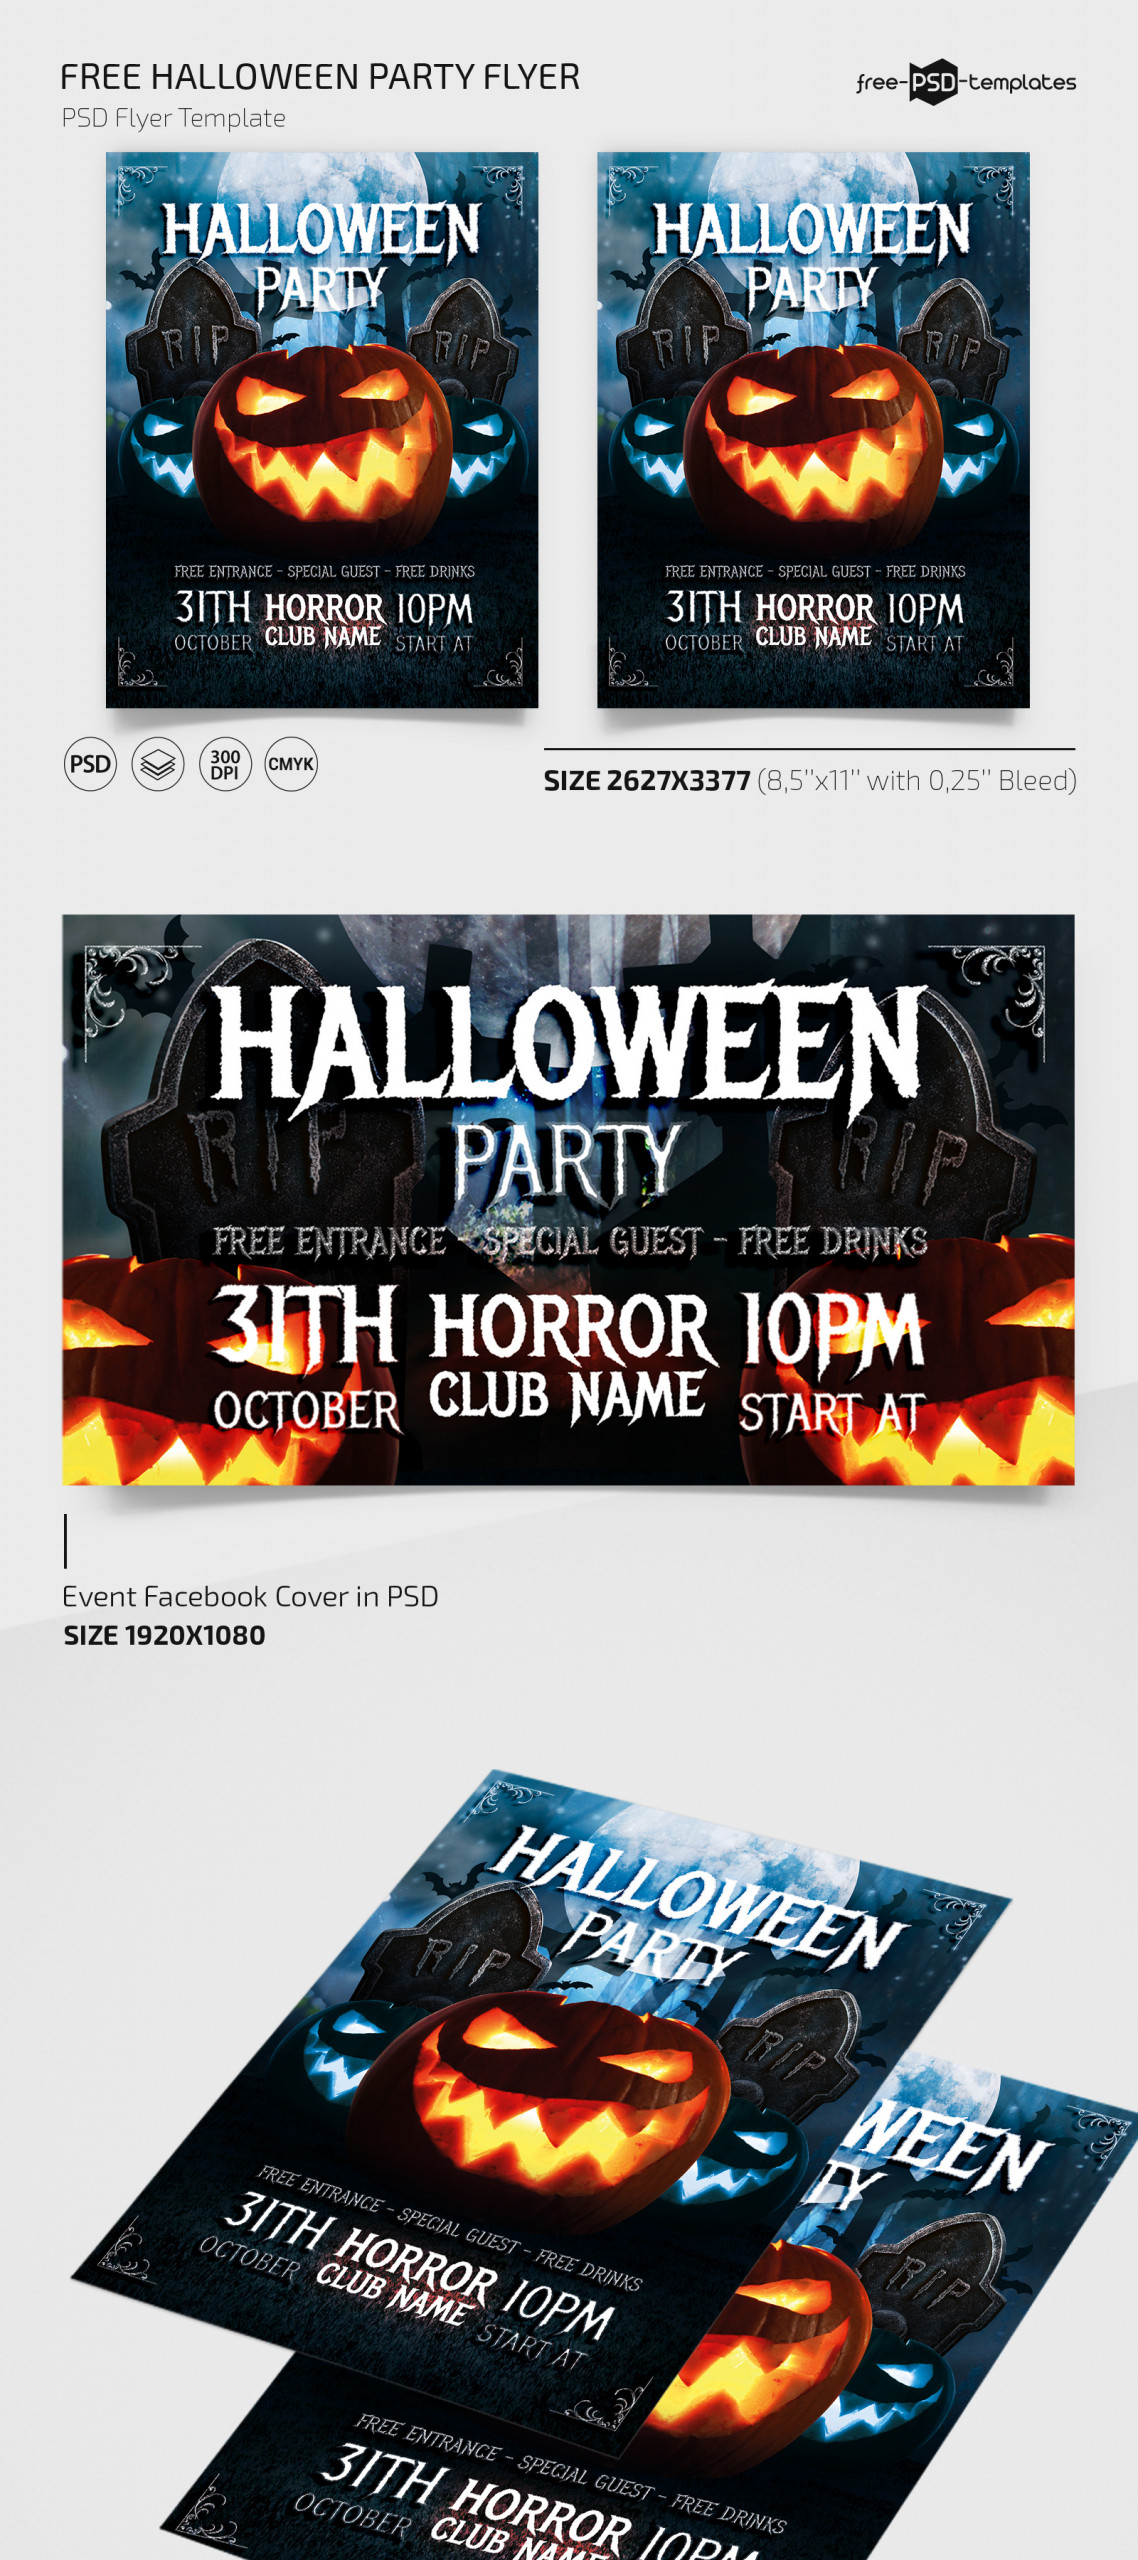 Free Halloween Party Flyer Template